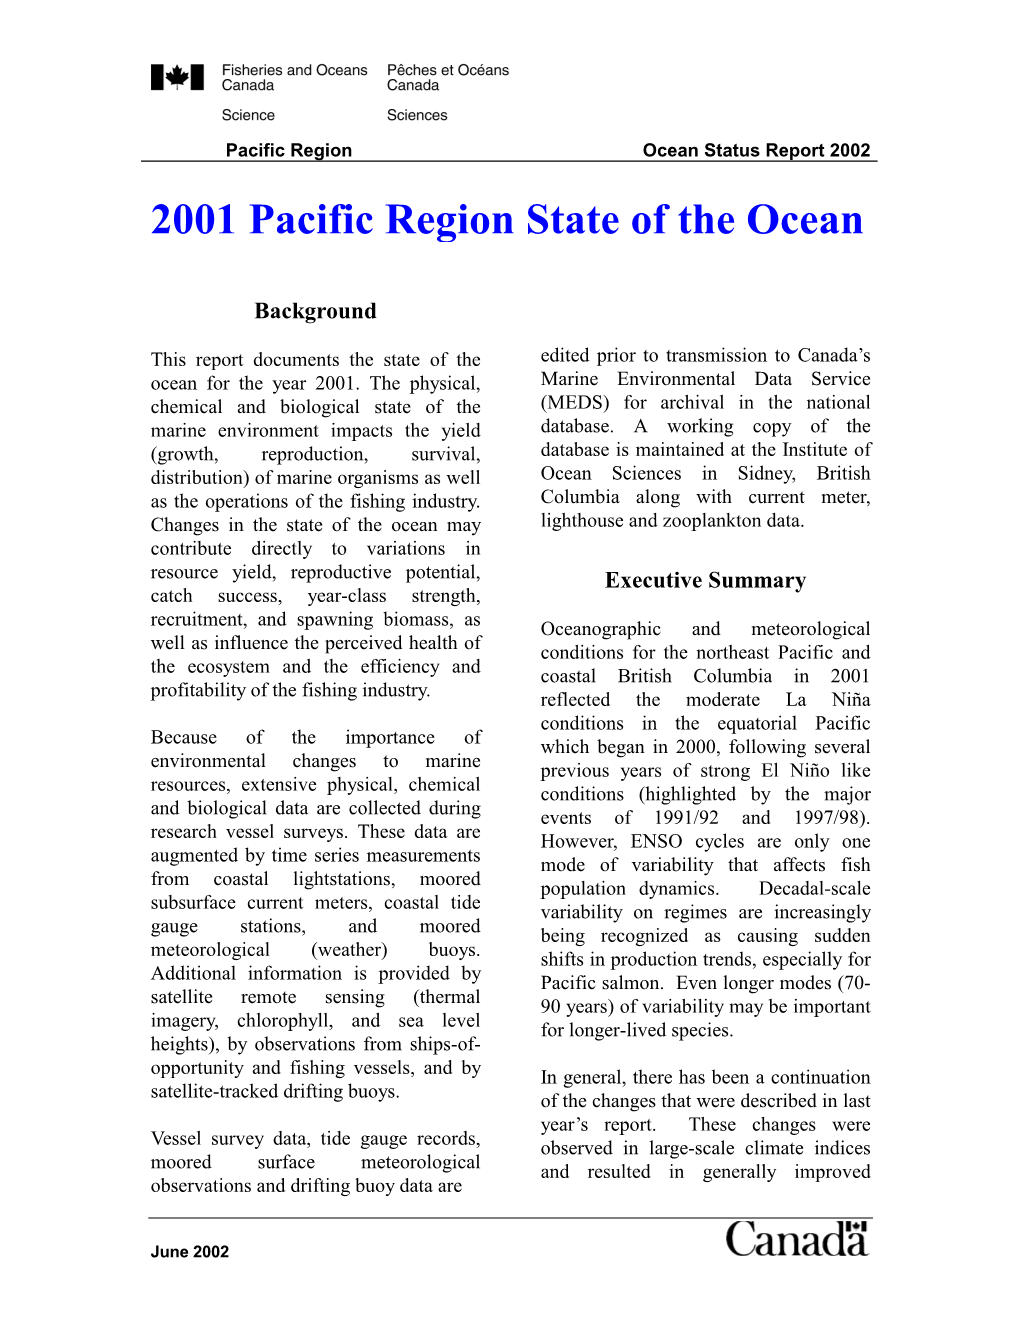 2001 Pacific Region State of the Ocean